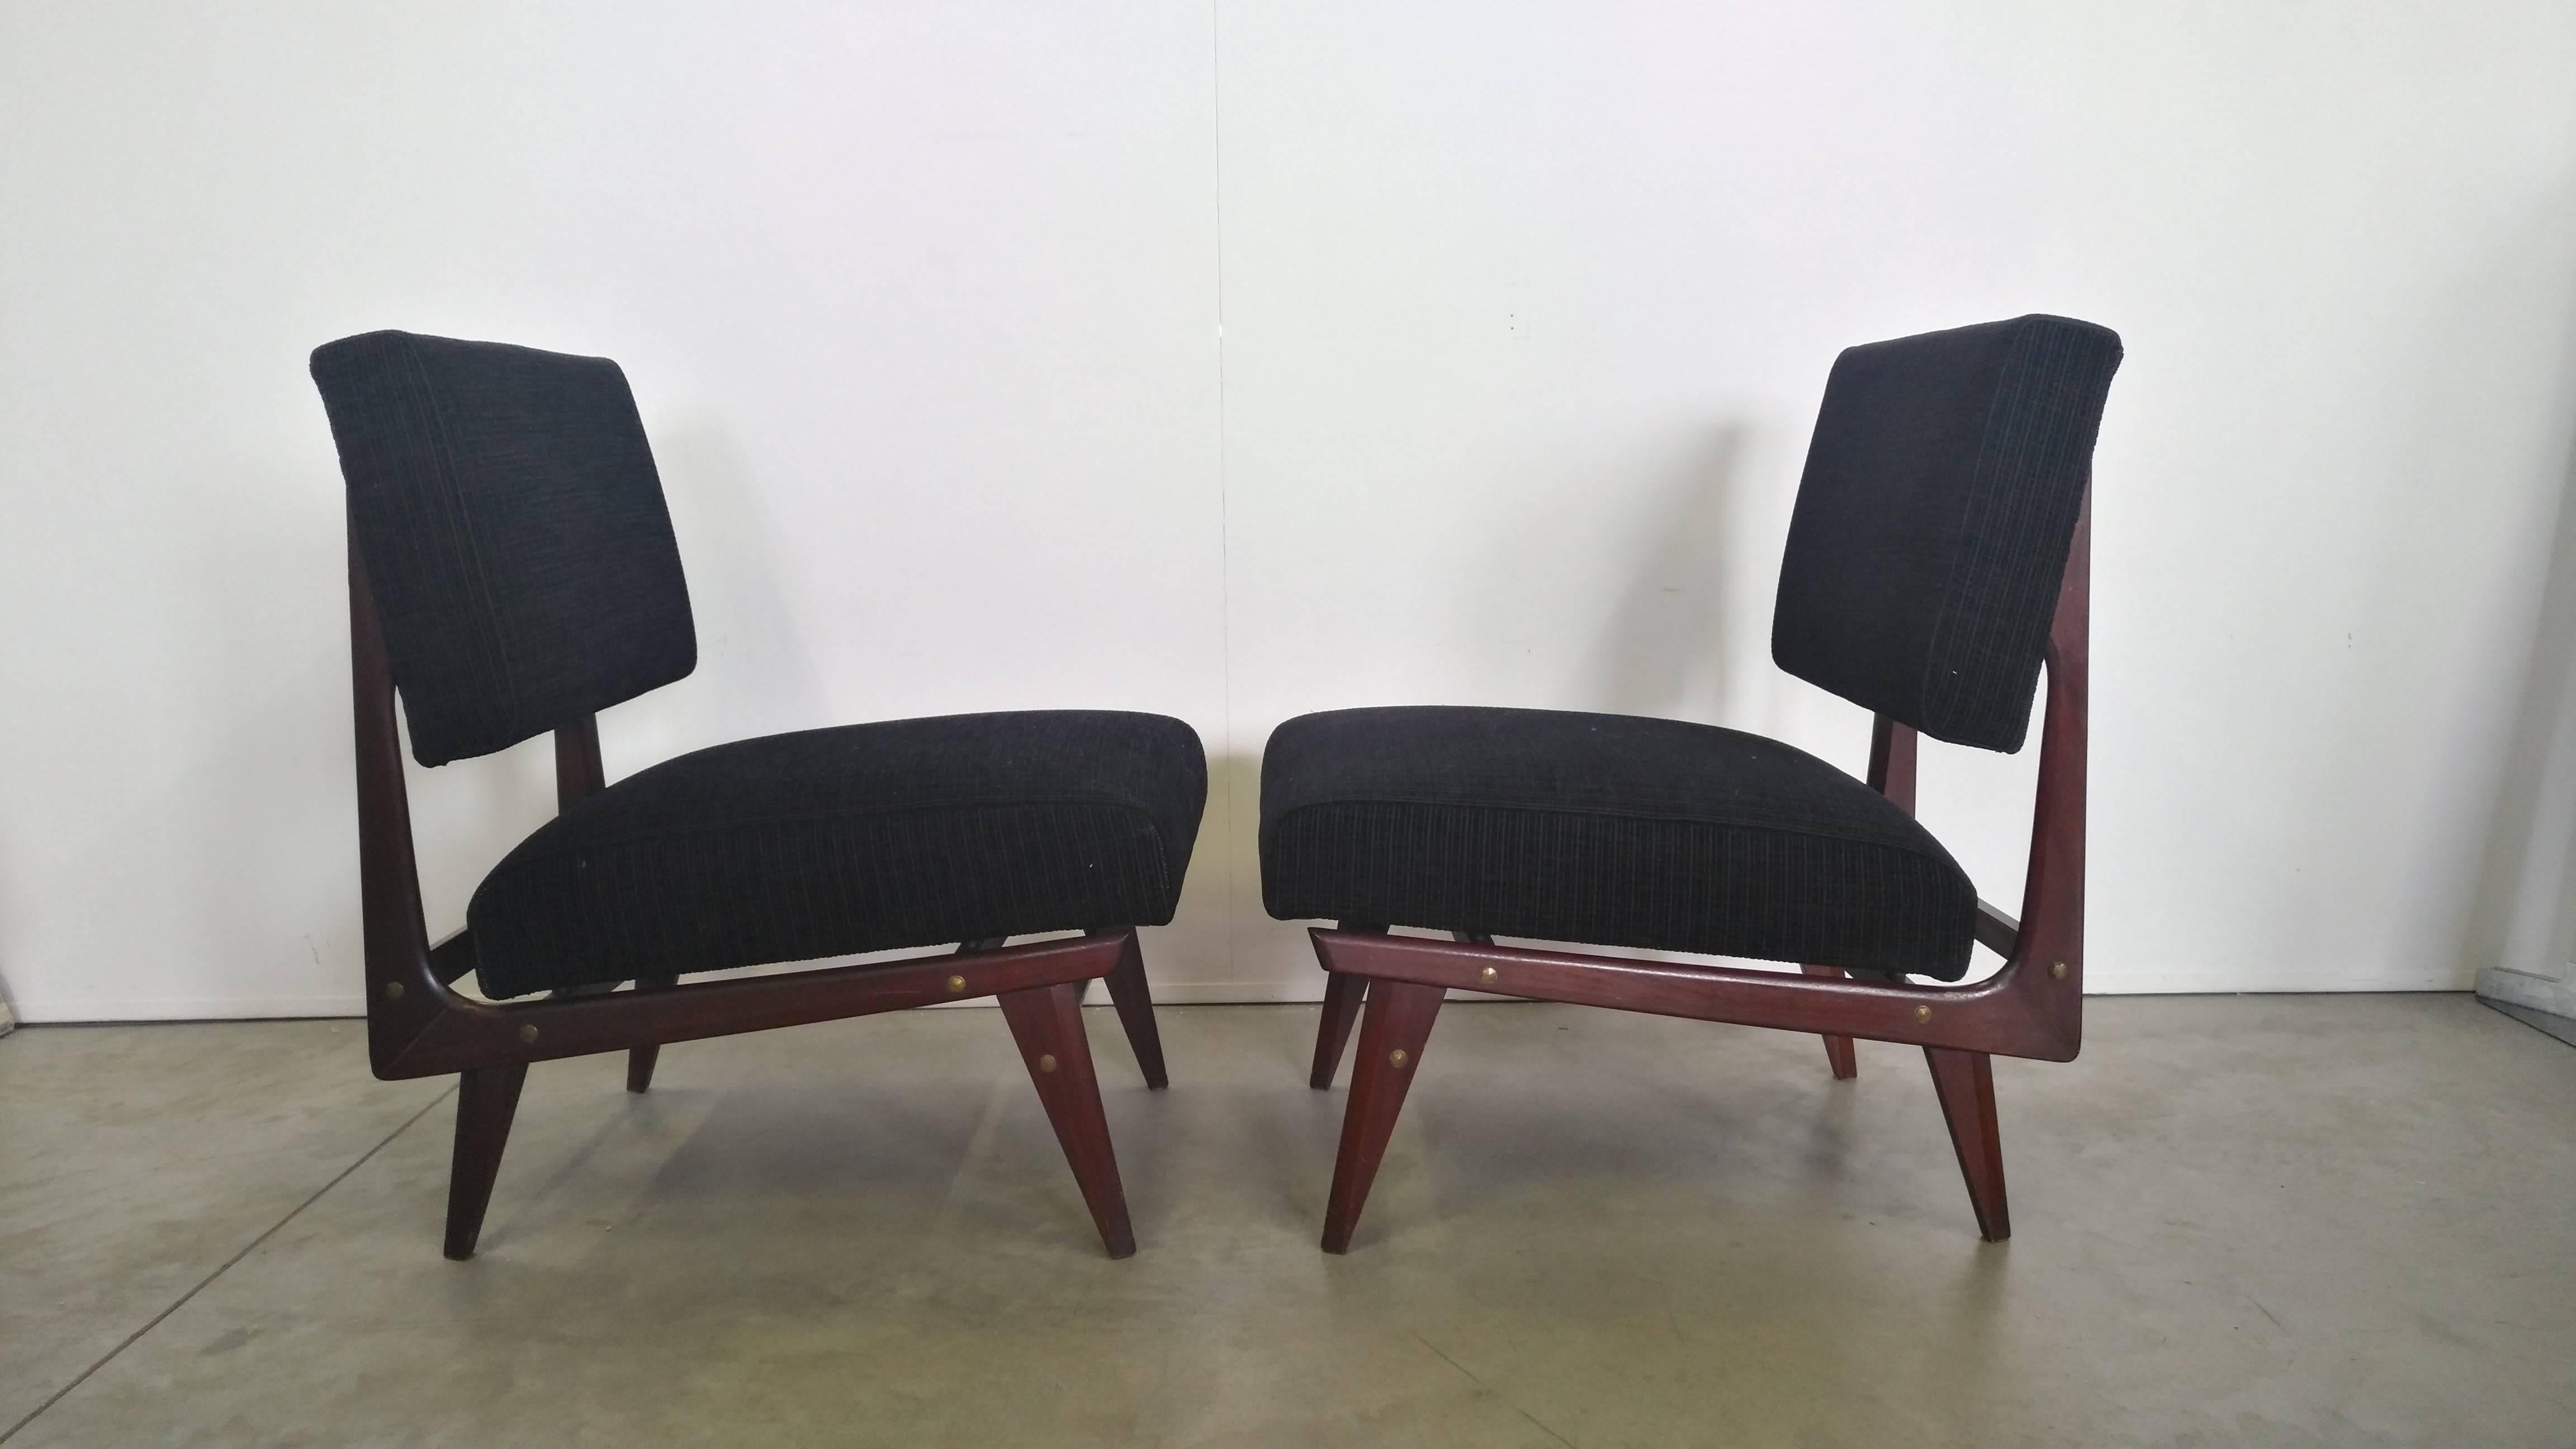 Beautiful armchairs with mahogany wood frame linked to the seat by brass custom junctions, black velvet new upholstery
manufactured in 1950 by the company Dassi Lissone.